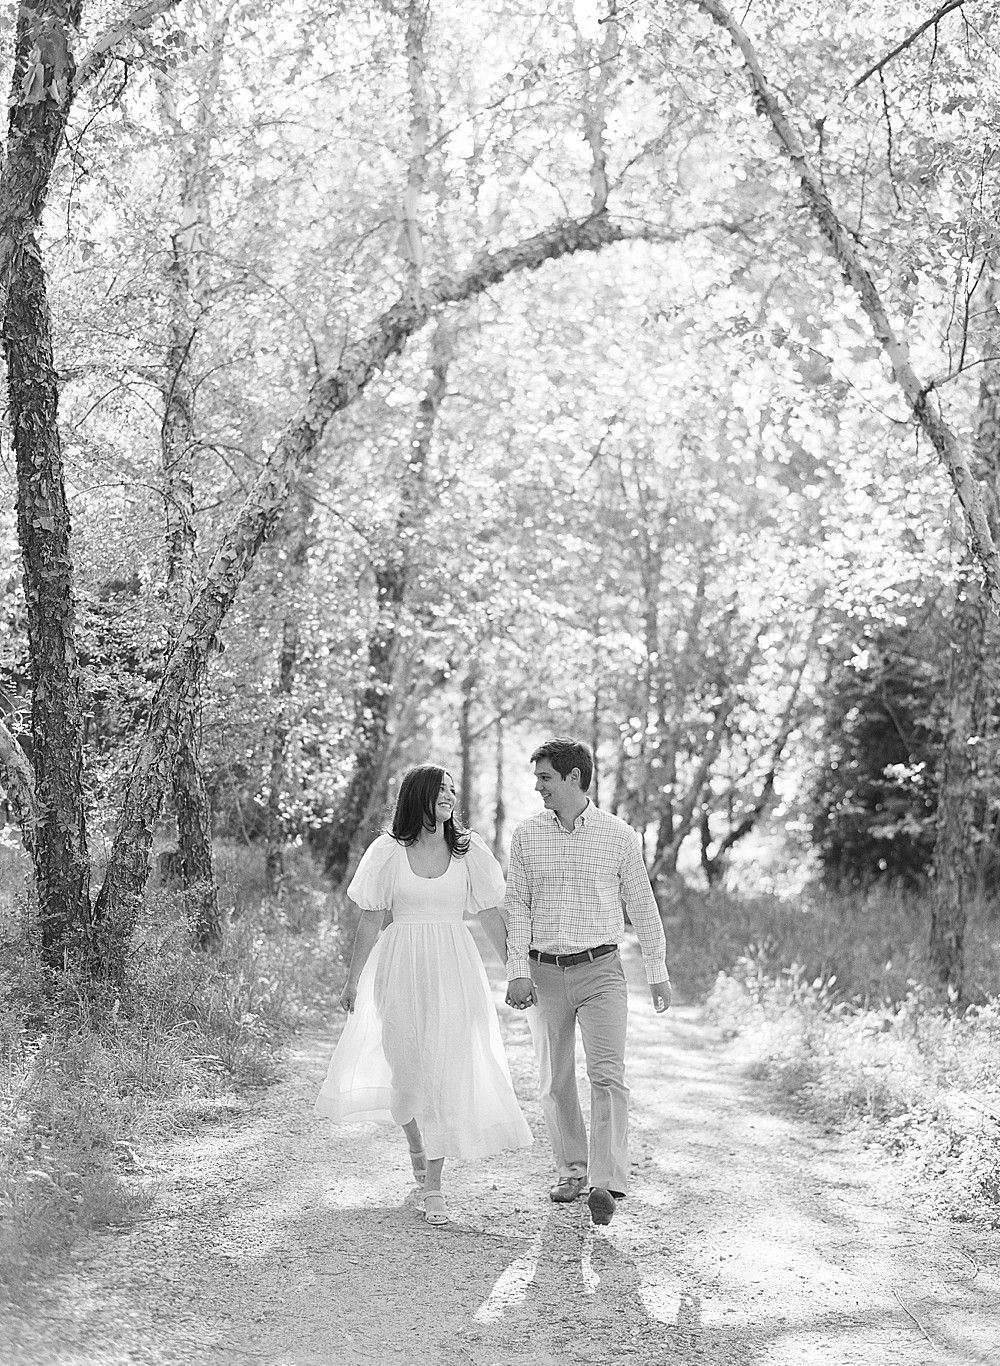 Black and white engagement photo, captured on film by Laura Watson Photography